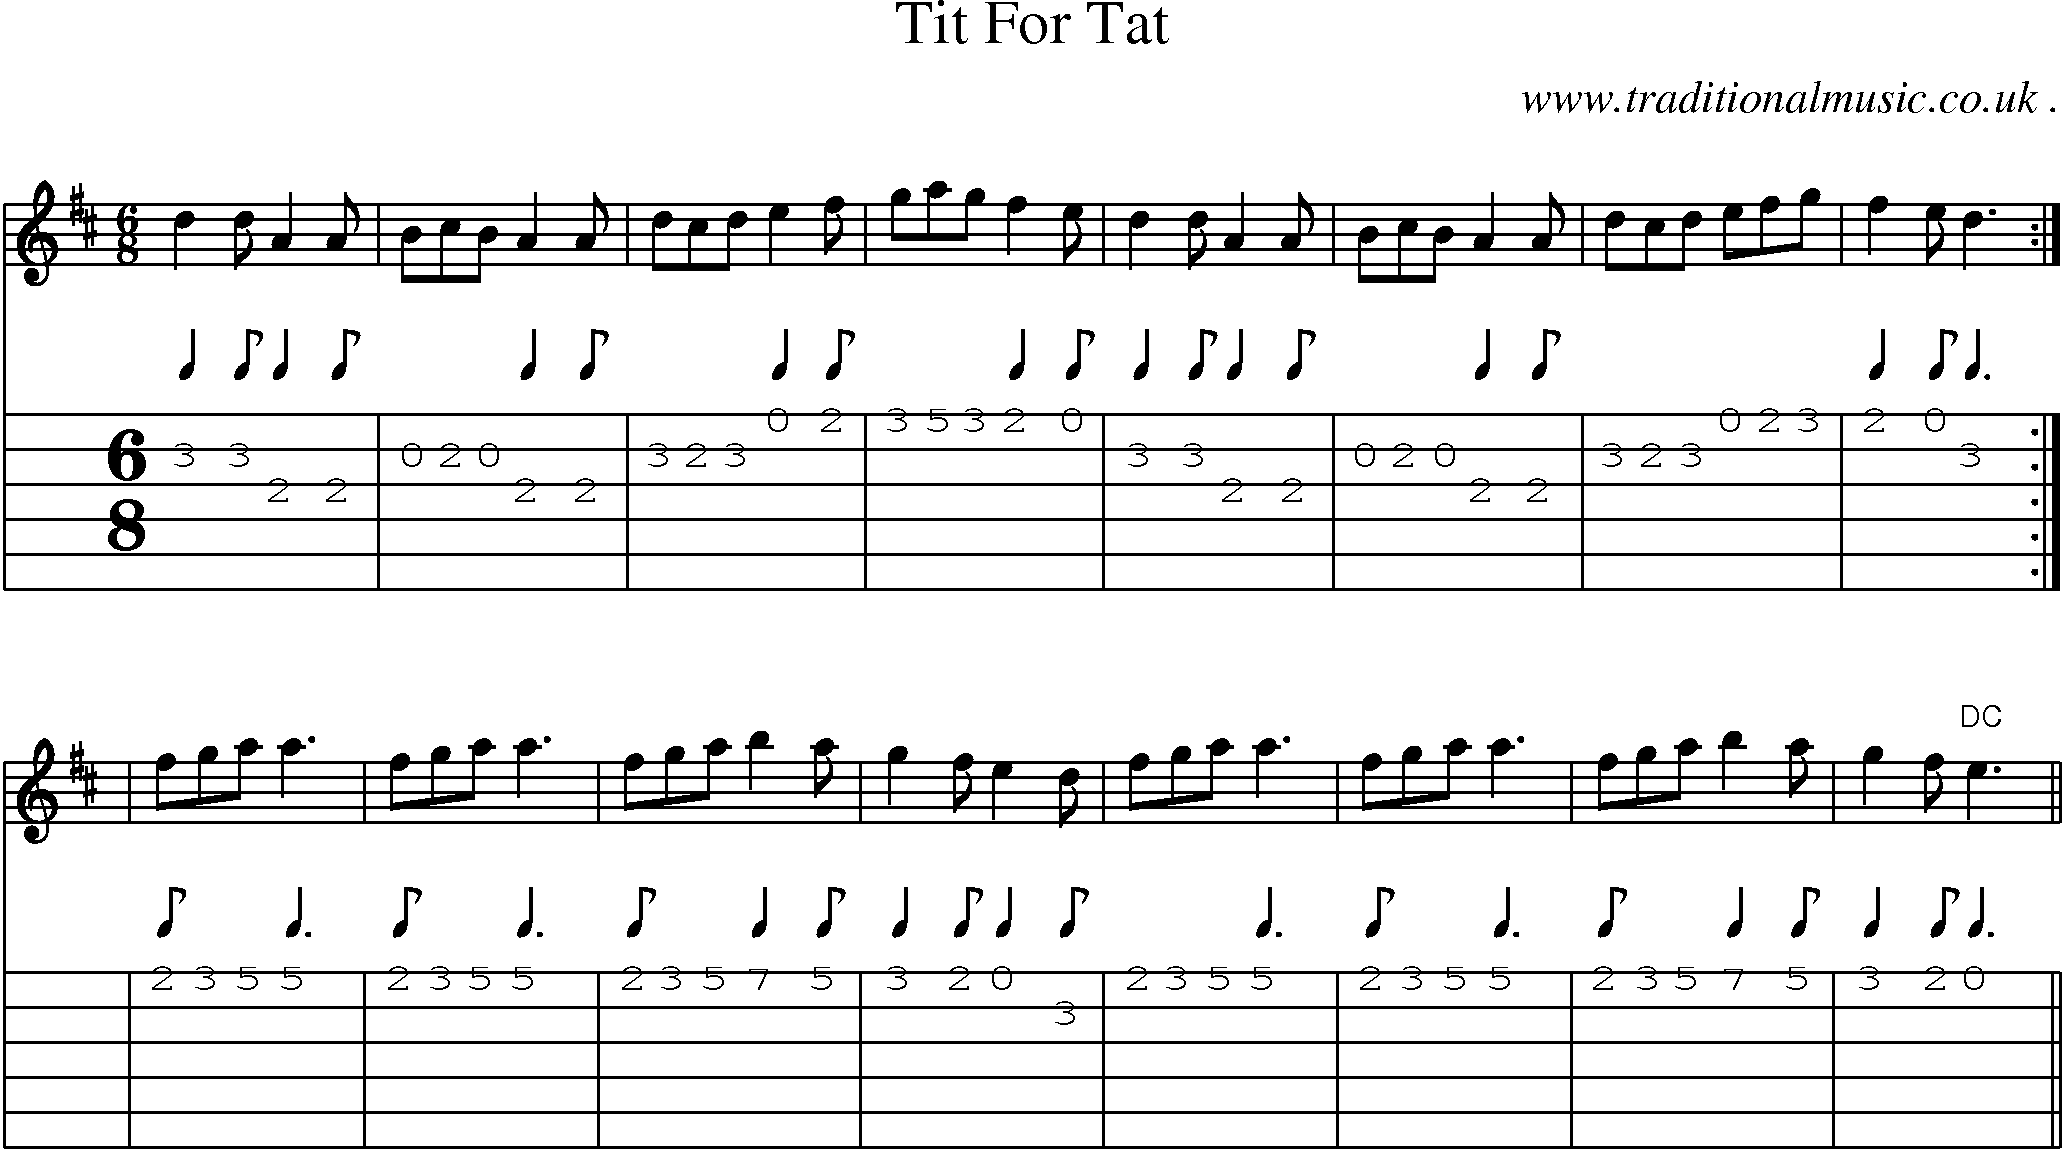 Sheet-Music and Guitar Tabs for Tit For Tat